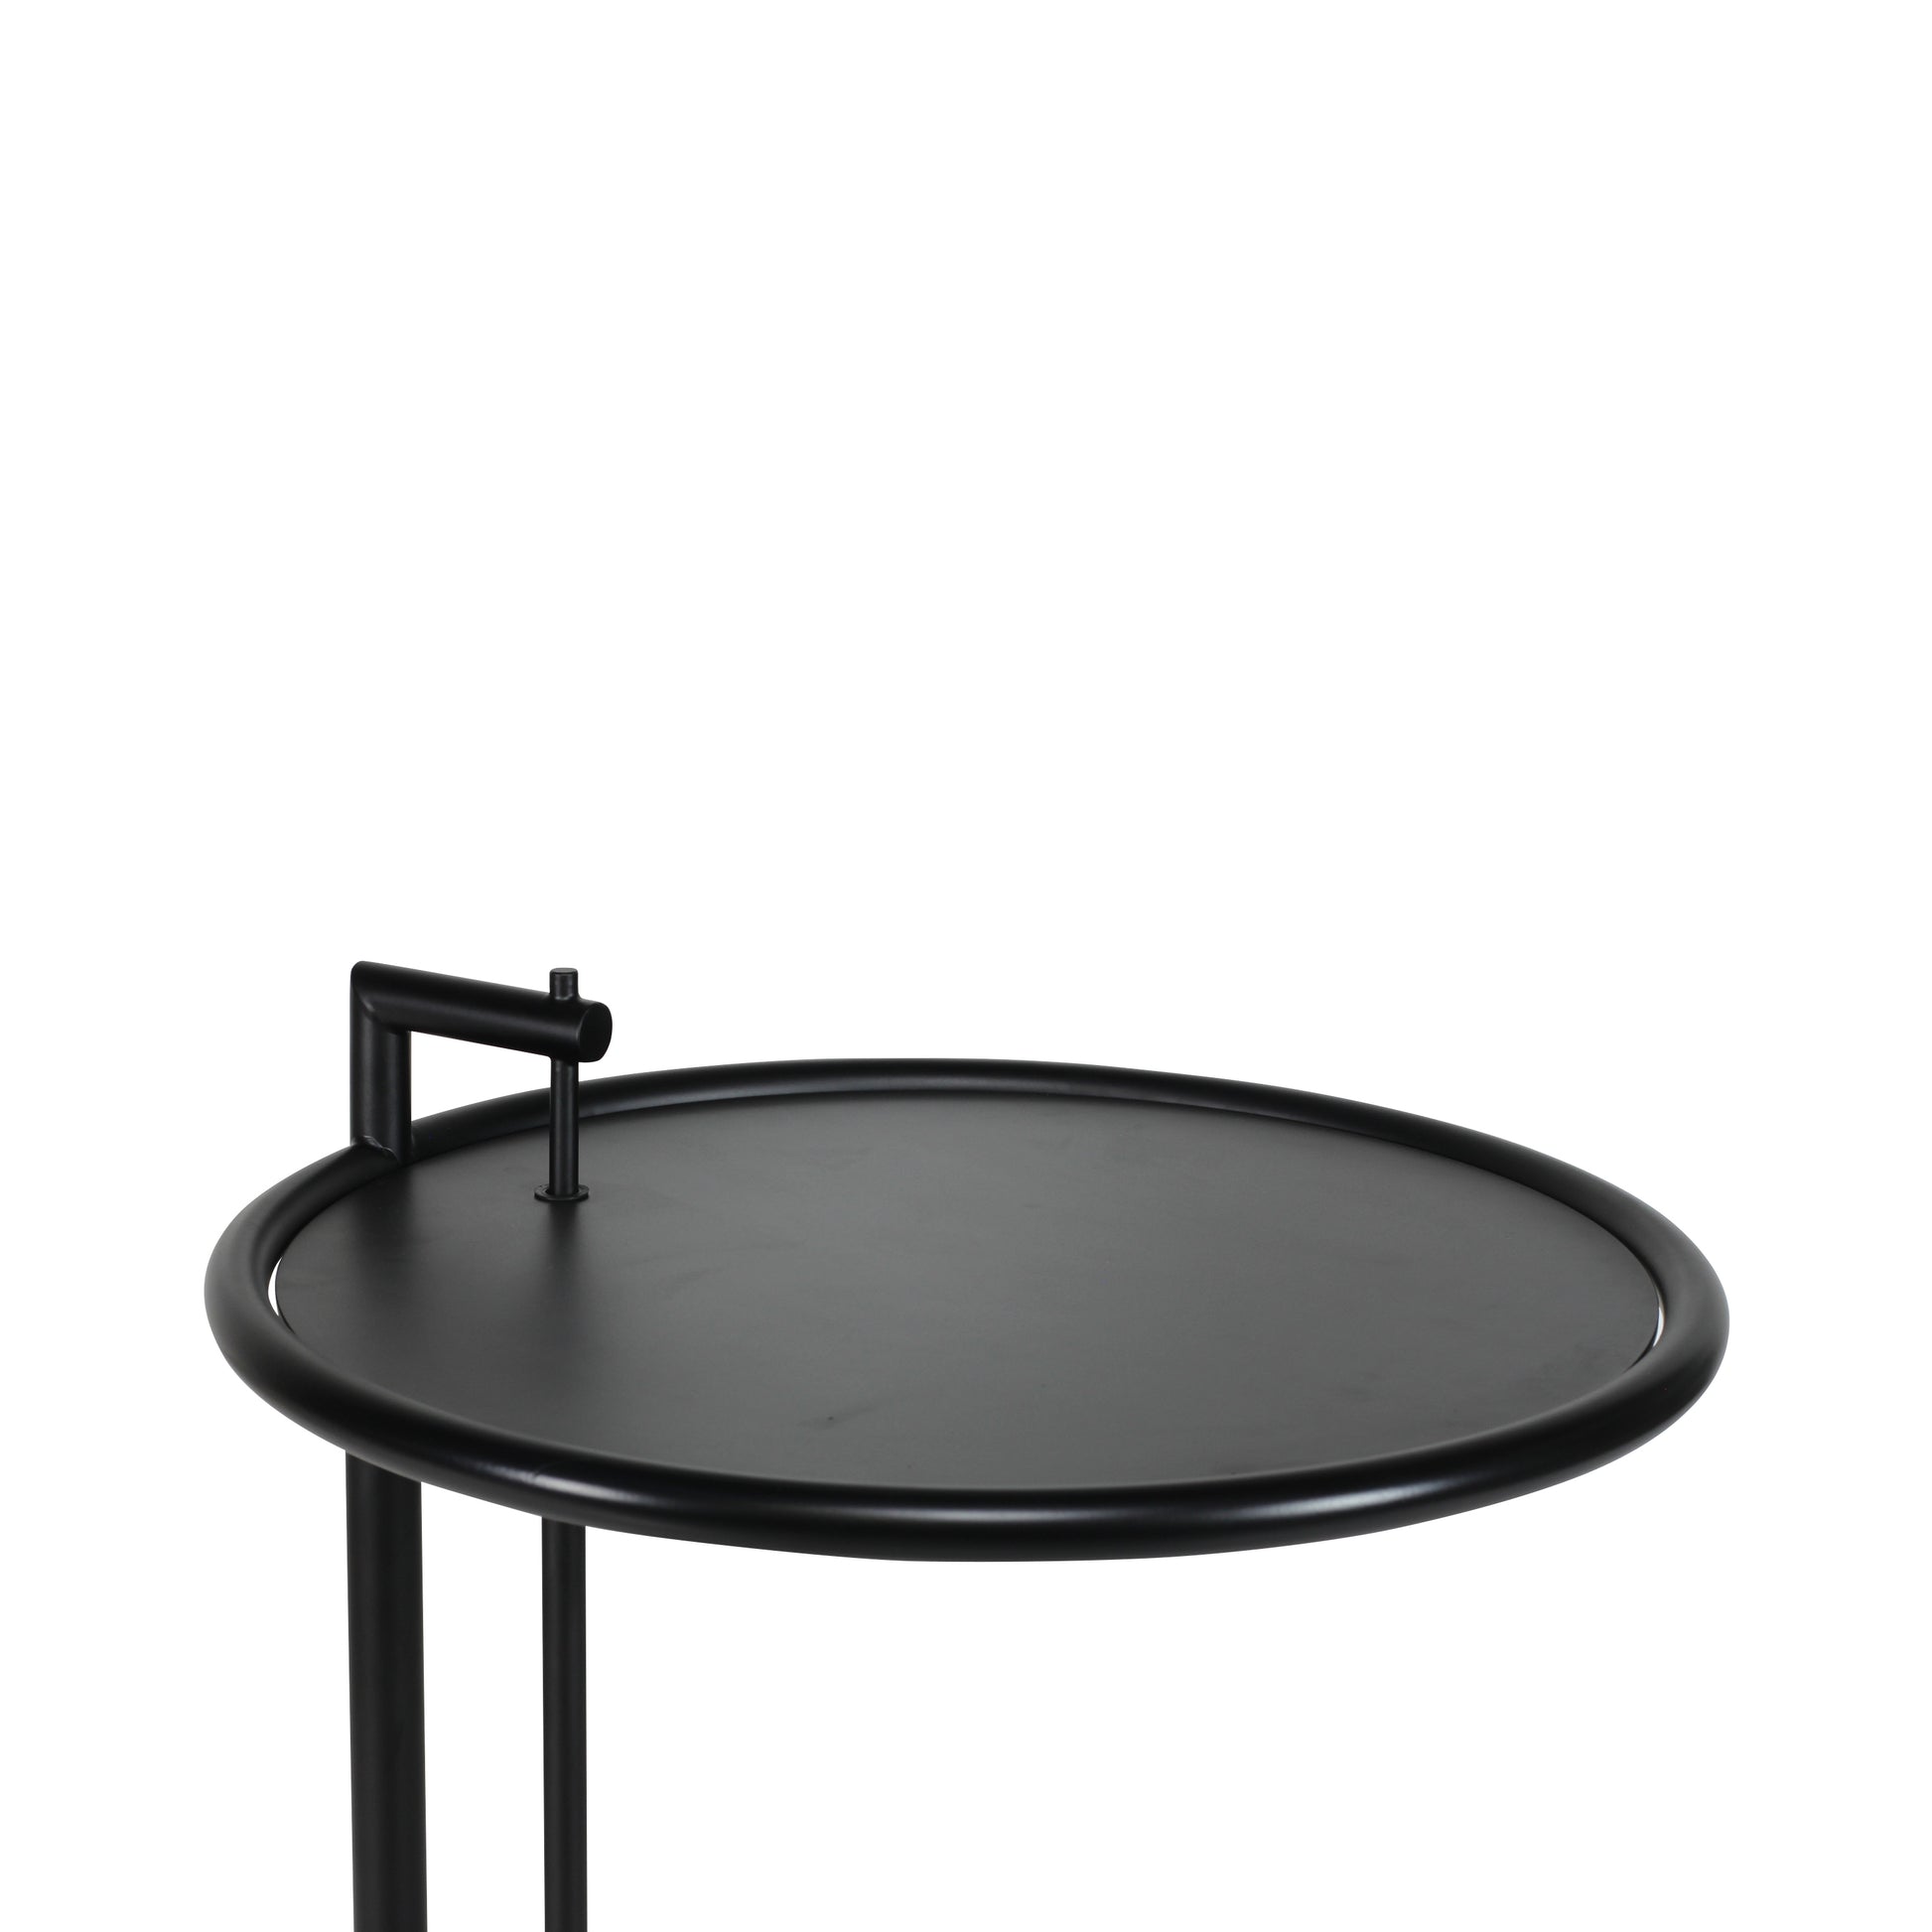 Adjustable table style | Black lacquered  Black laqueredc metal top | Side